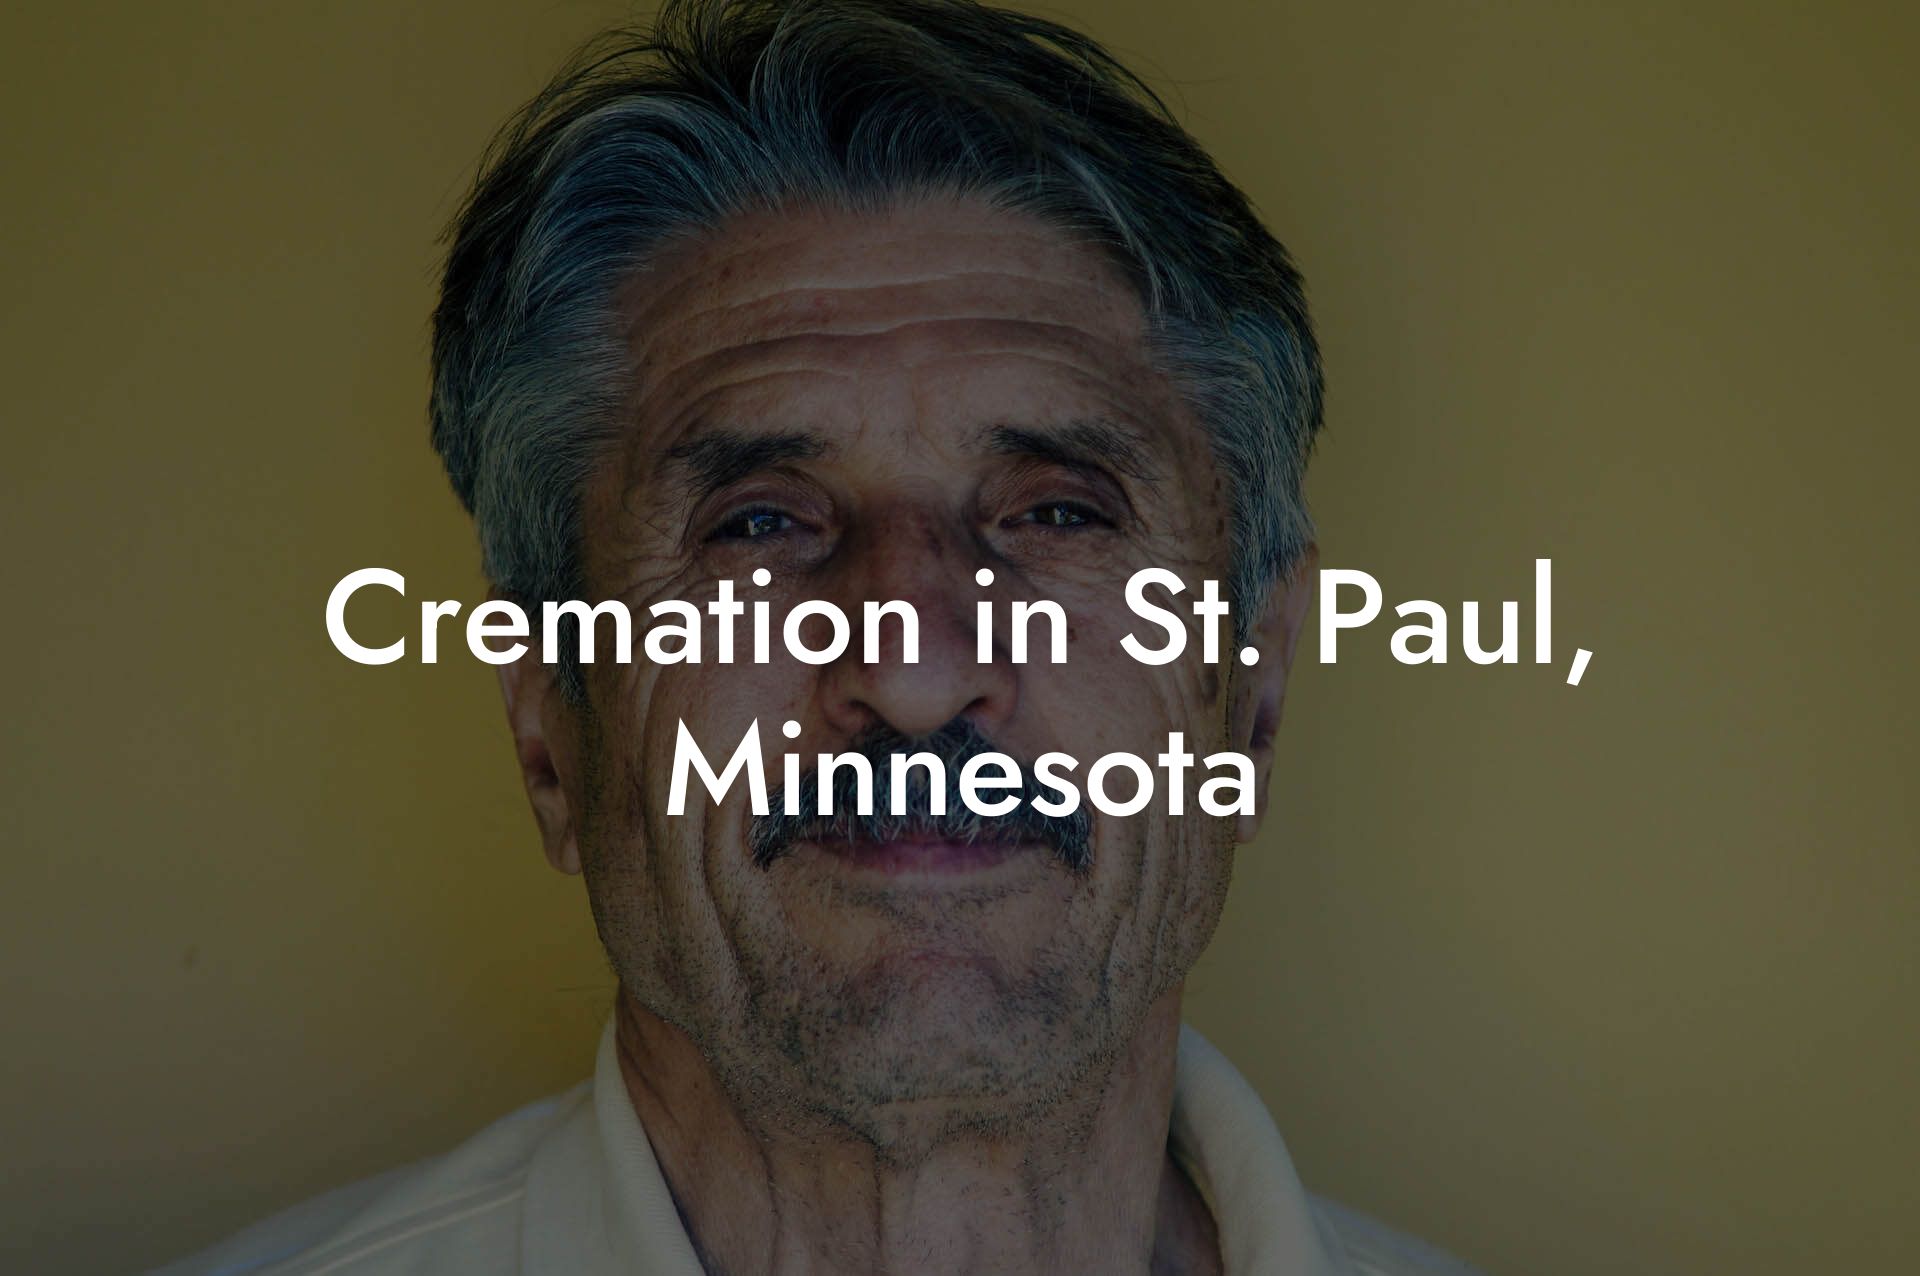 Cremation in St. Paul, Minnesota